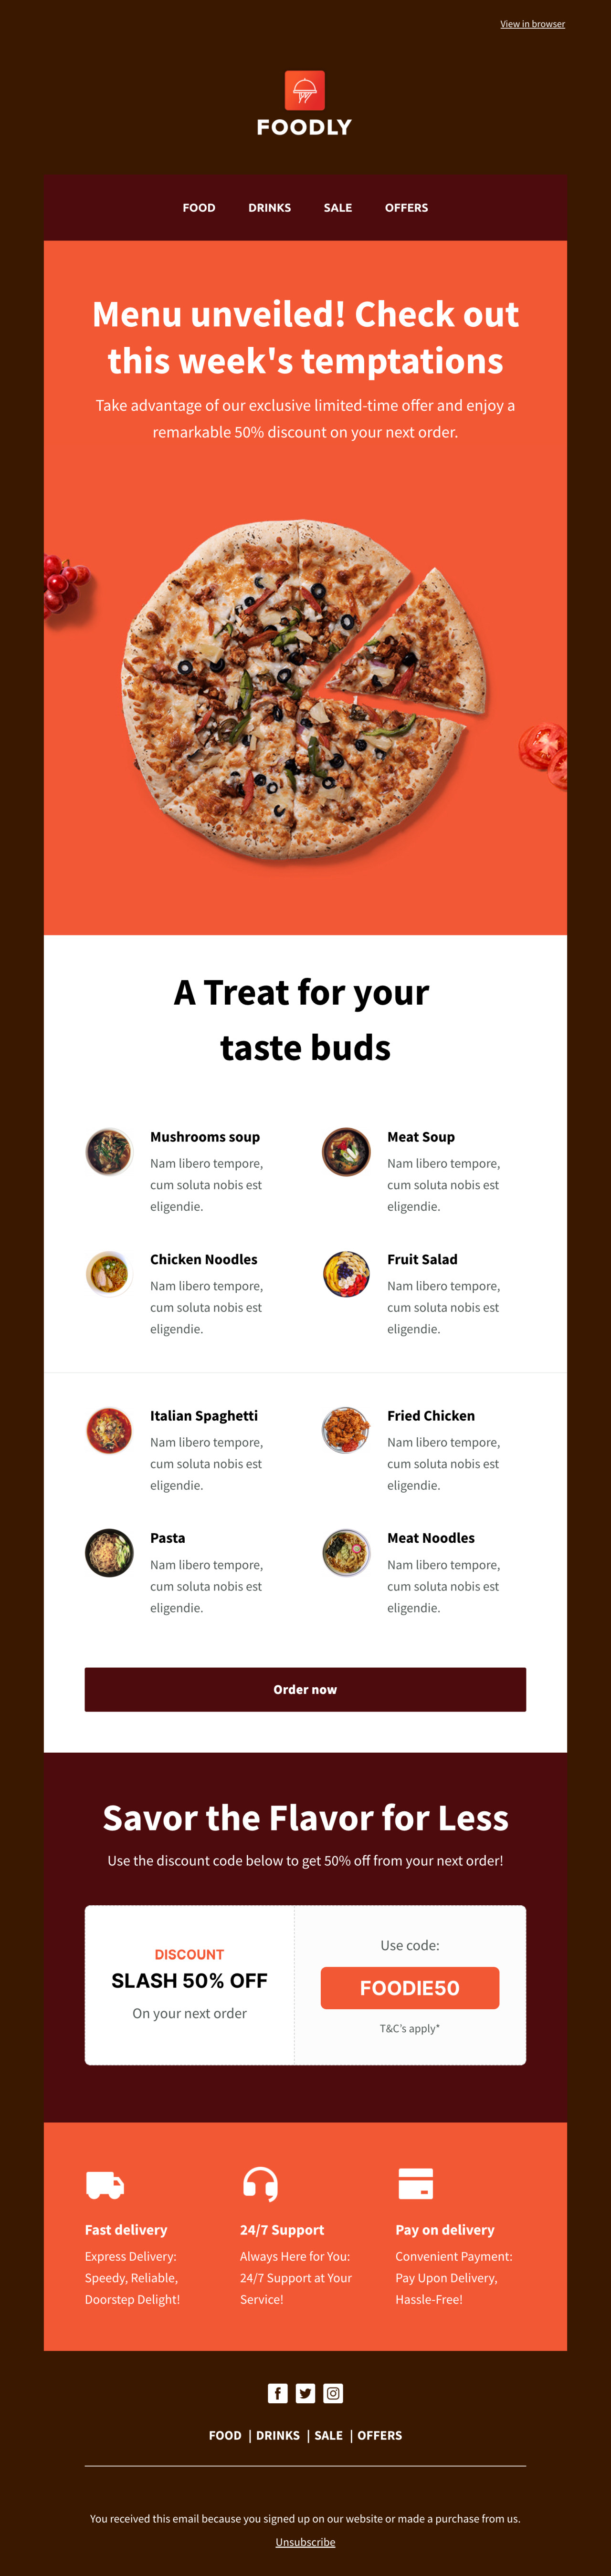 Food Menu email template - Made by MailerLite